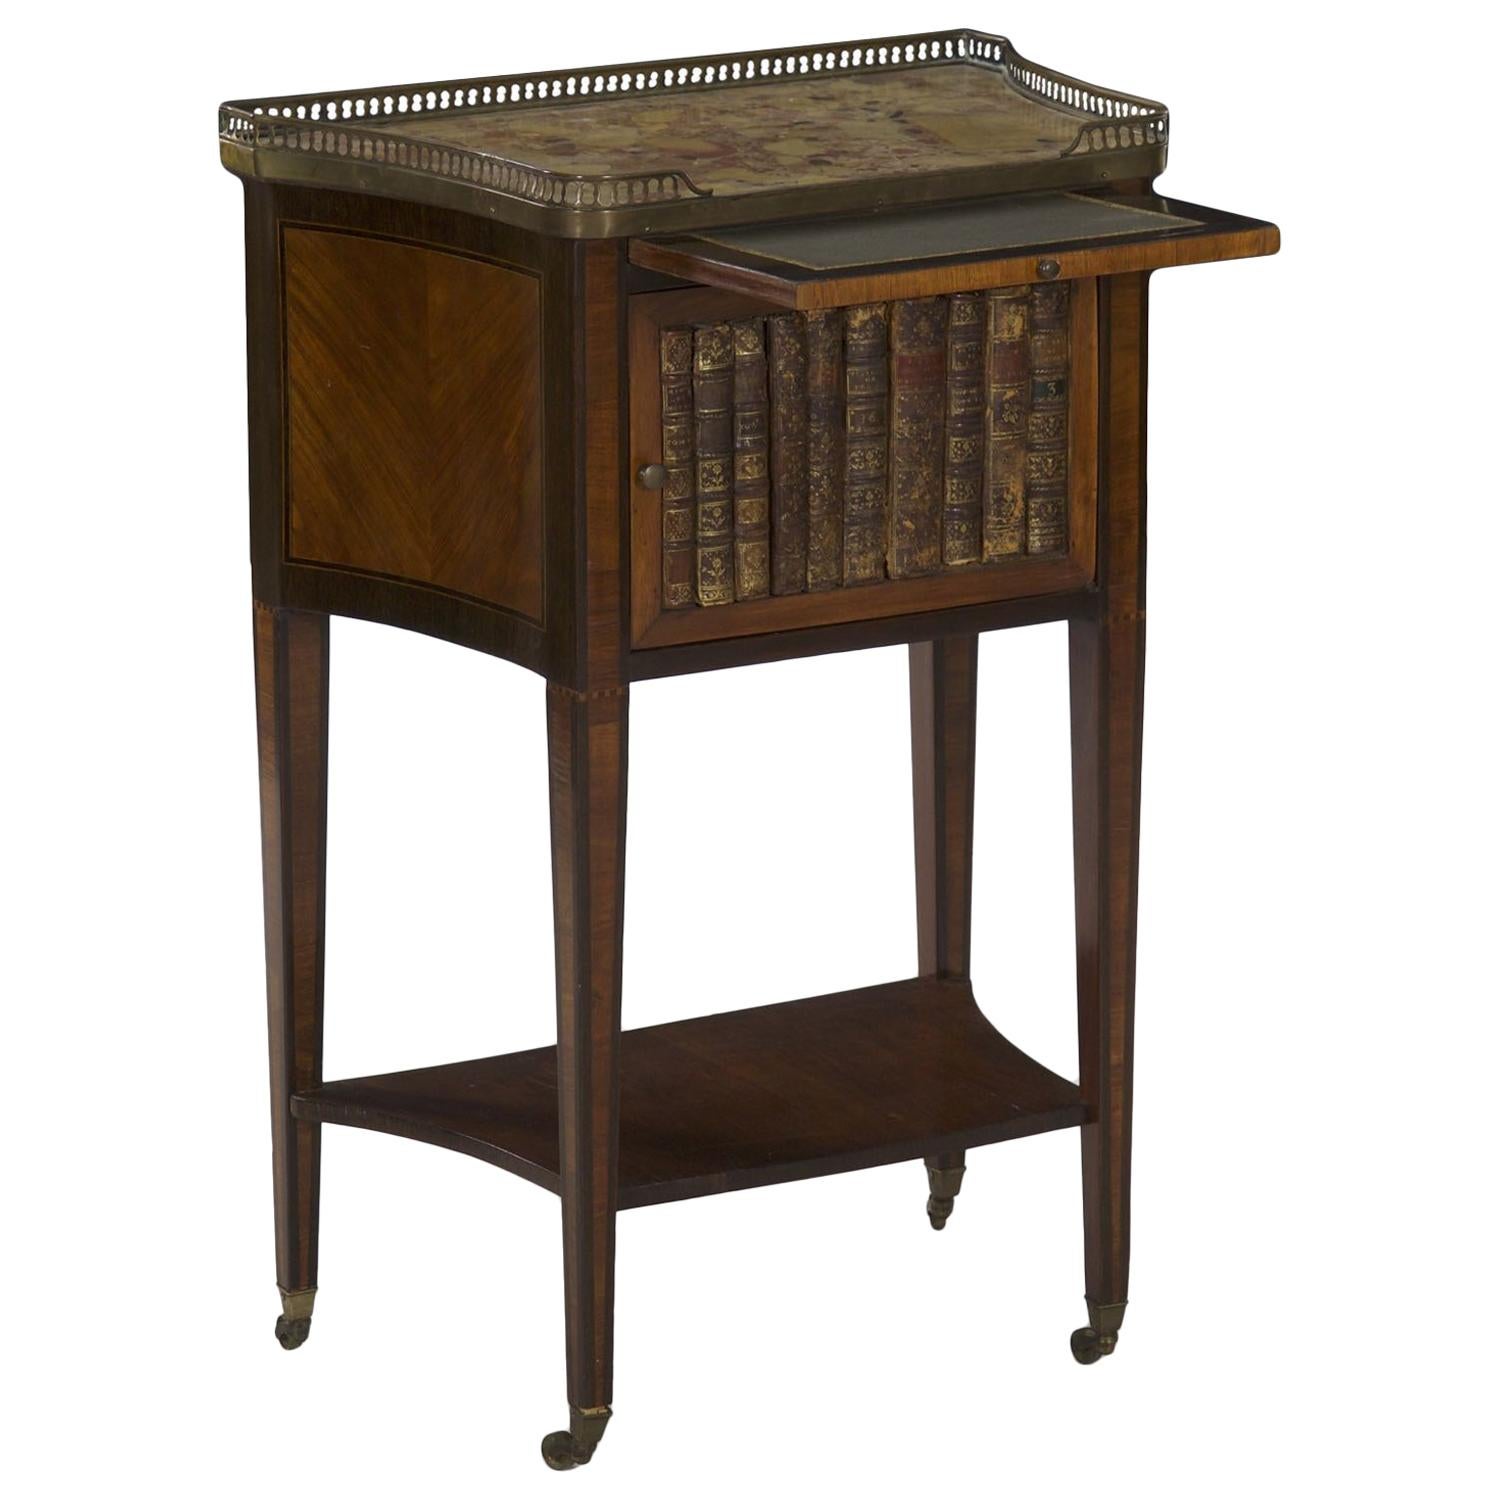 19th Century French Antique Writing Stand Accent Table with Book-Spine Door